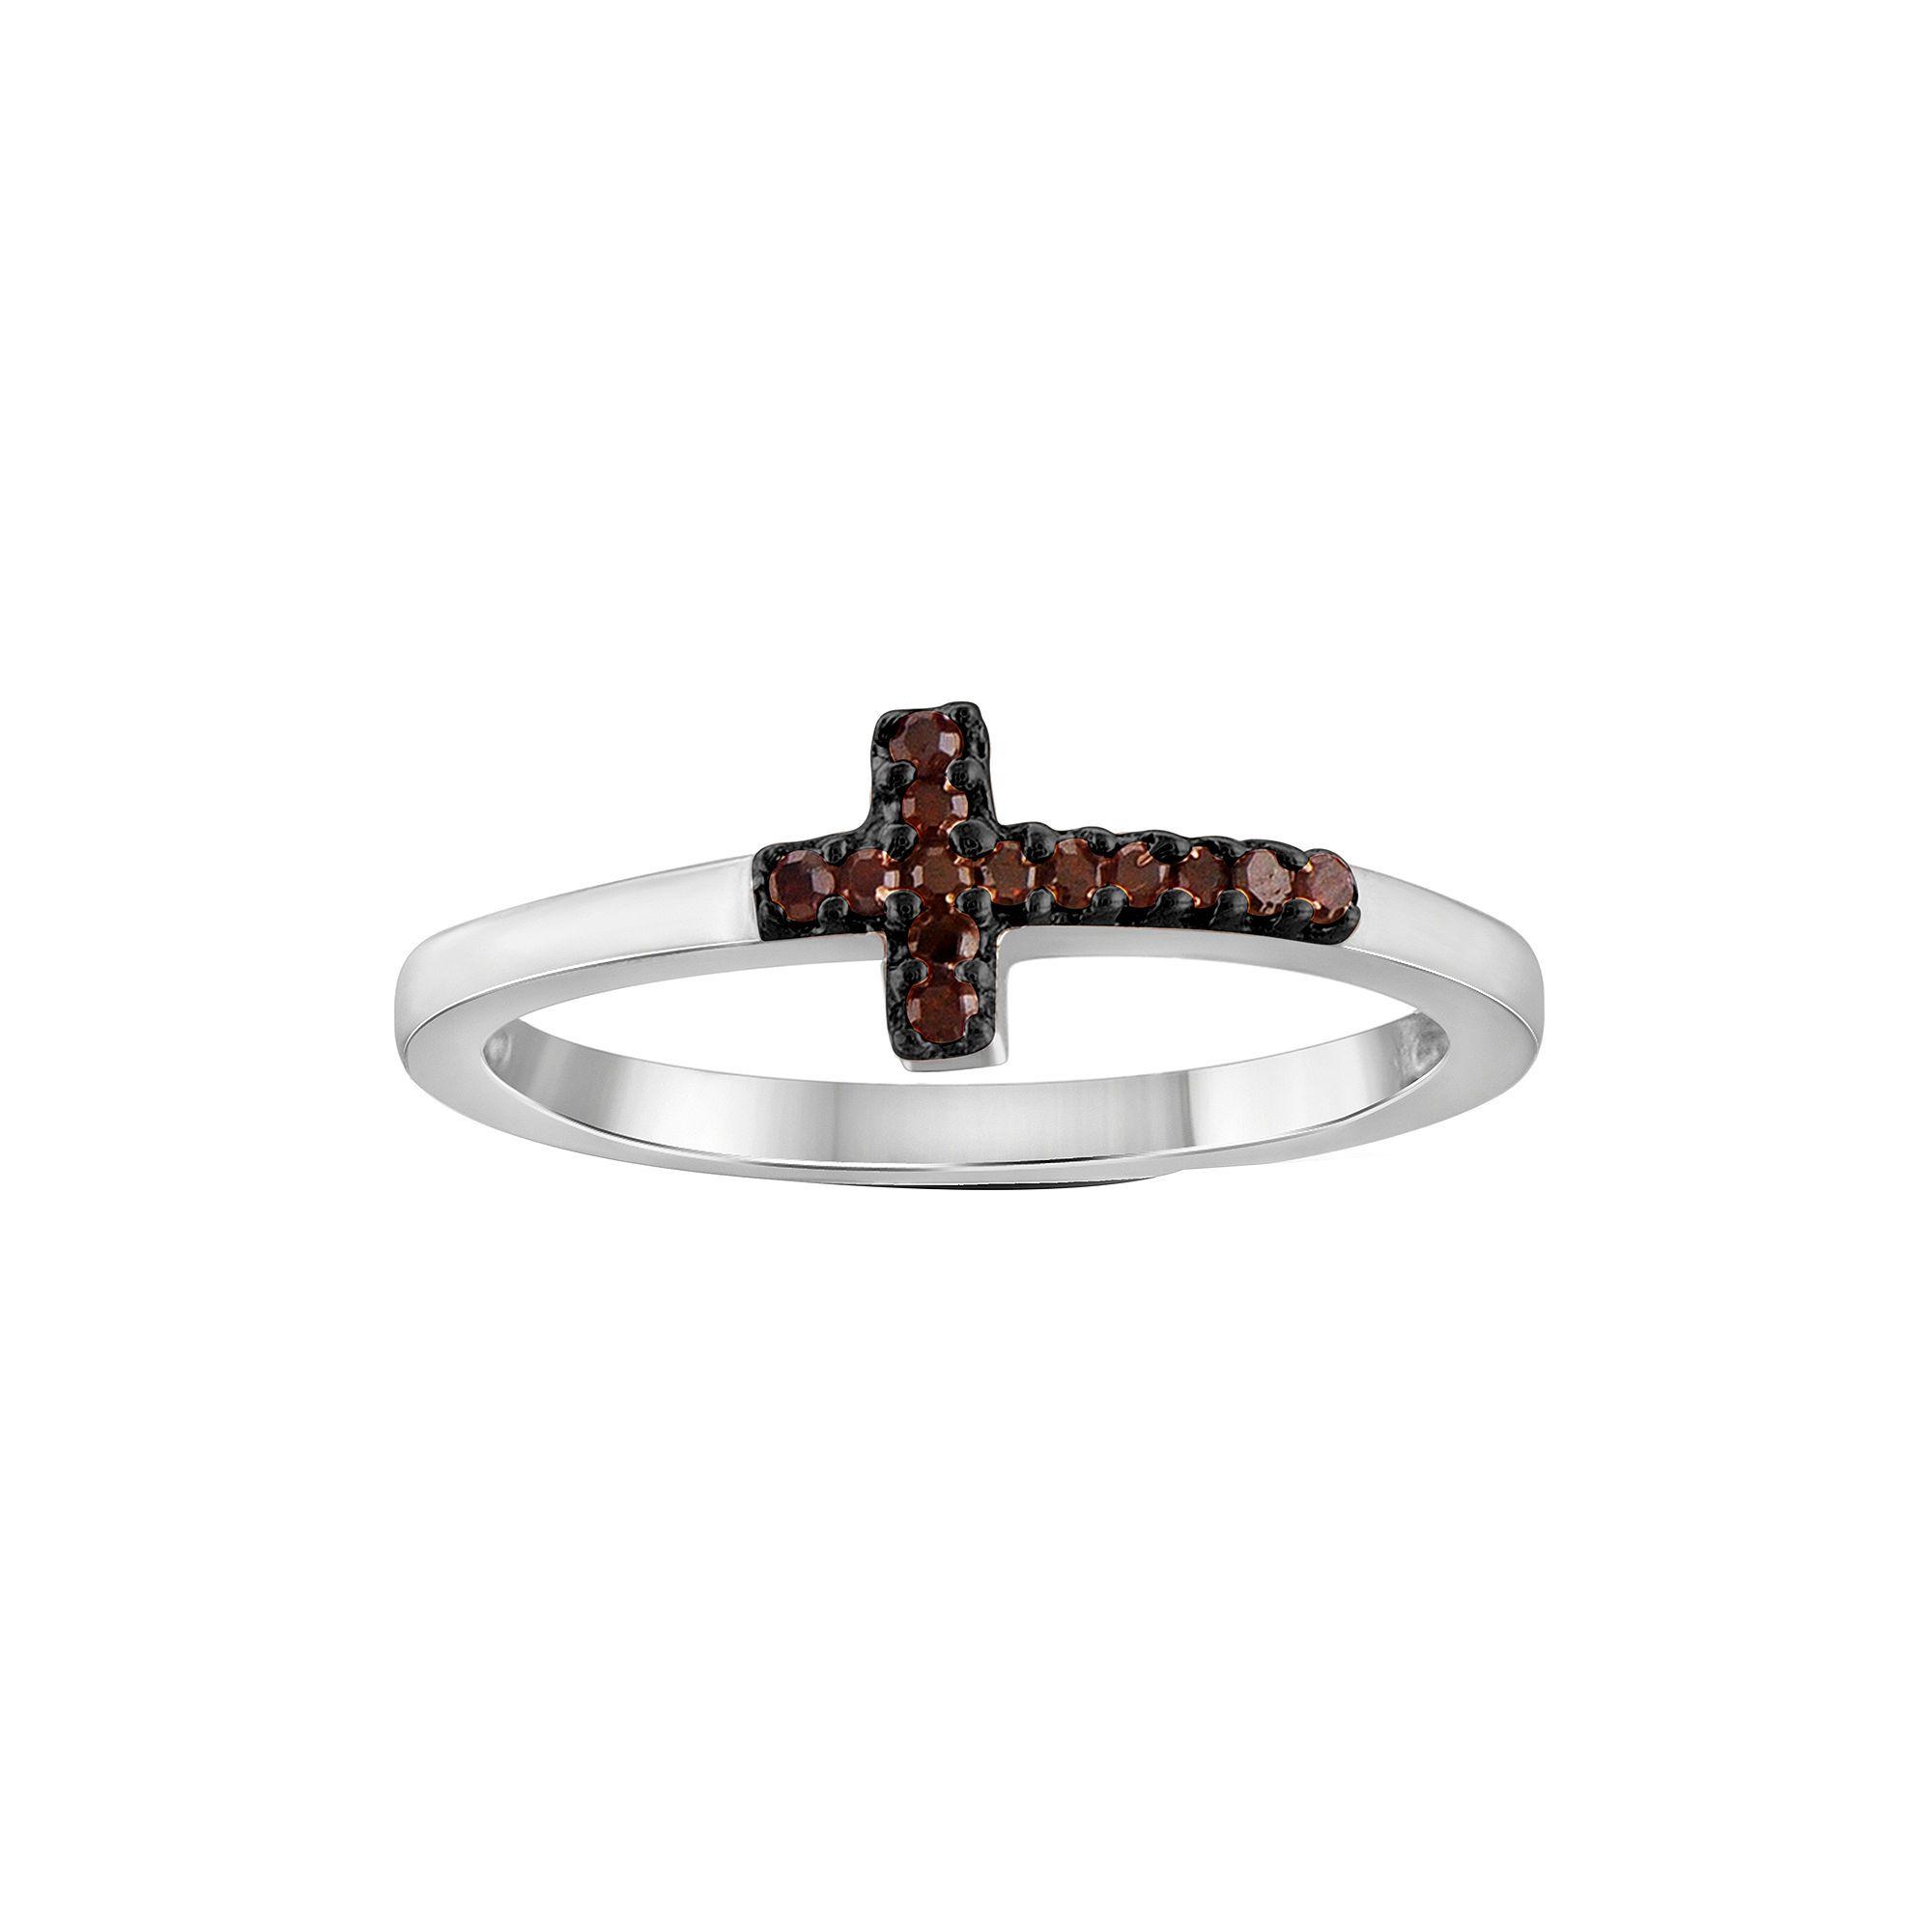 White Cross in Red Diamond Logo - BUY 1/10 CT. T.W. Color-Enhanced Red Diamond Sterling Silver Cross Ring